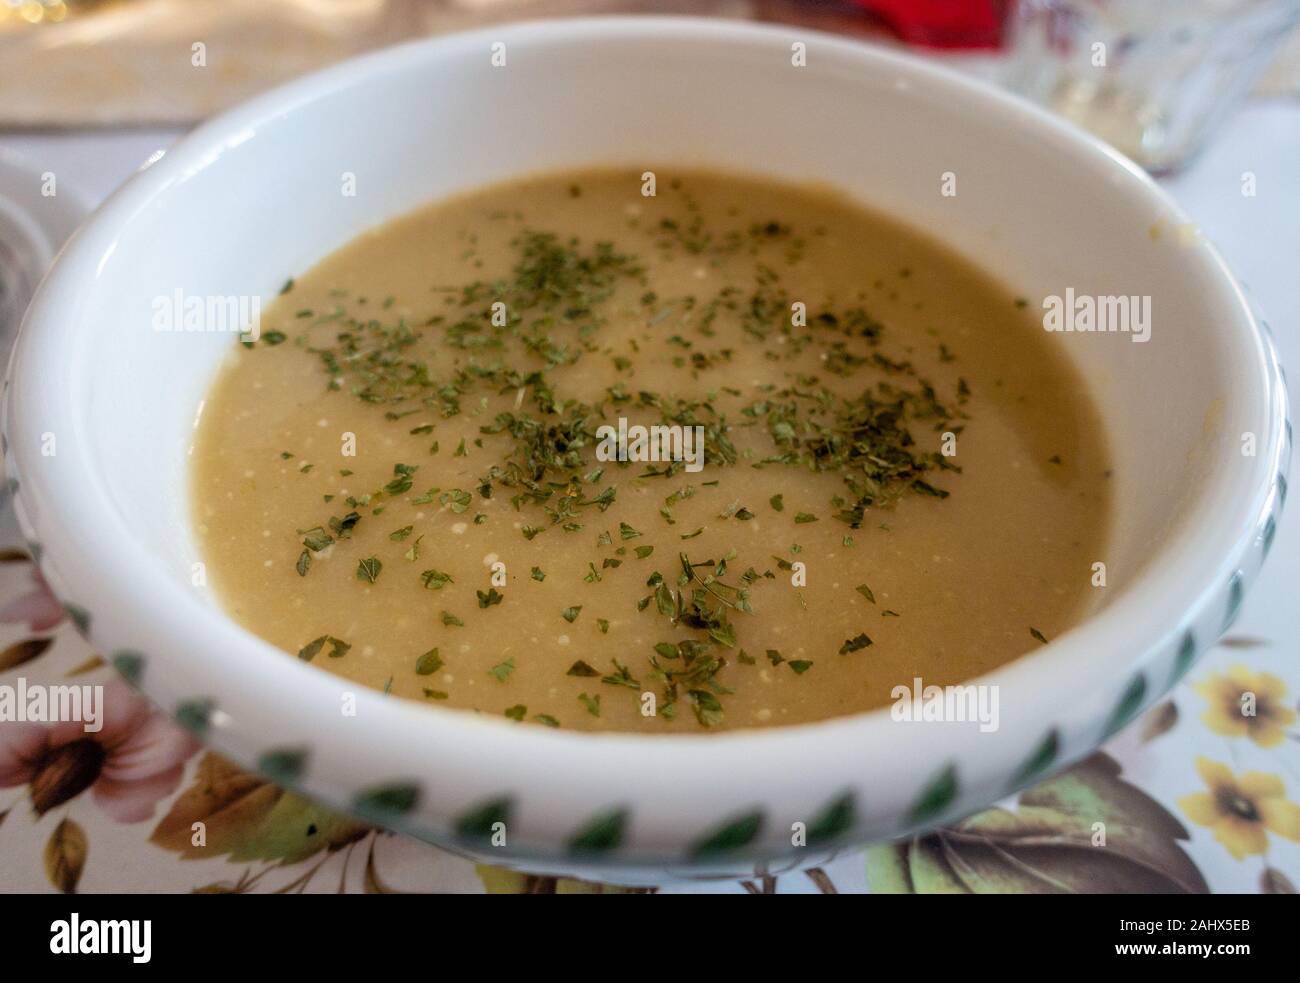 A bowl of homemade leek and potato soup garnished with s sprinkle of parsley. Stock Photo